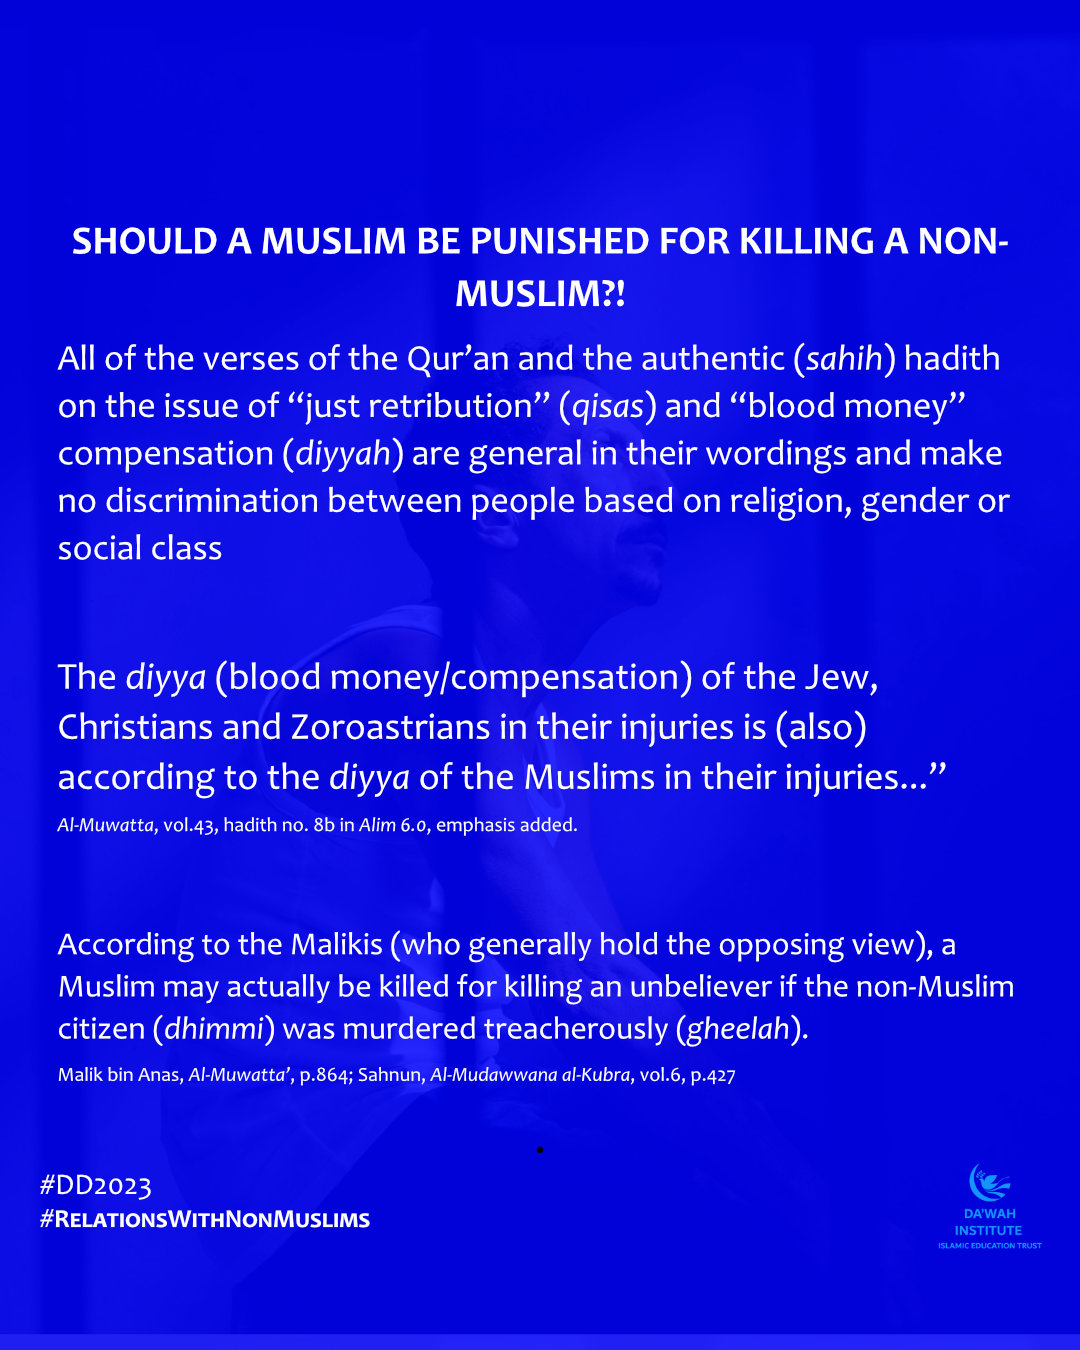 SHOULD A MUSLIM BE PUNISHED FOR KILLING A NON-MUSLIM?